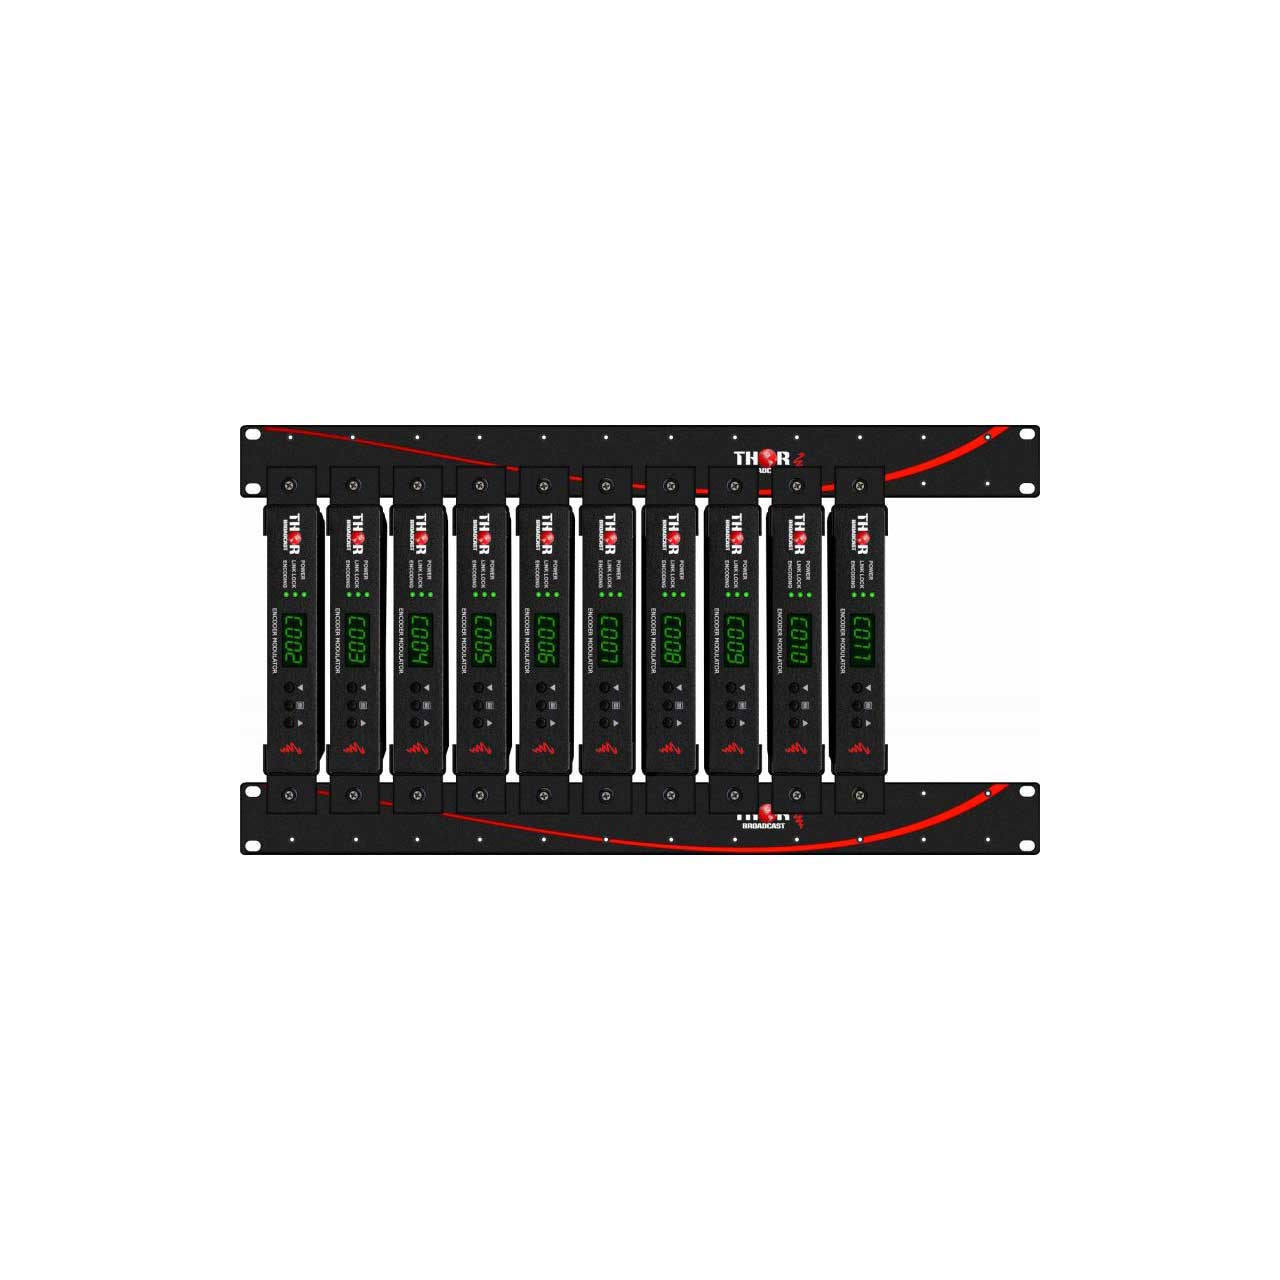 Thor H-Petit-10CH-RM Petit HDMI RF Modulator Chassis System for 1-12 Units - 10 Channel  H-PETIT-10CH-RM